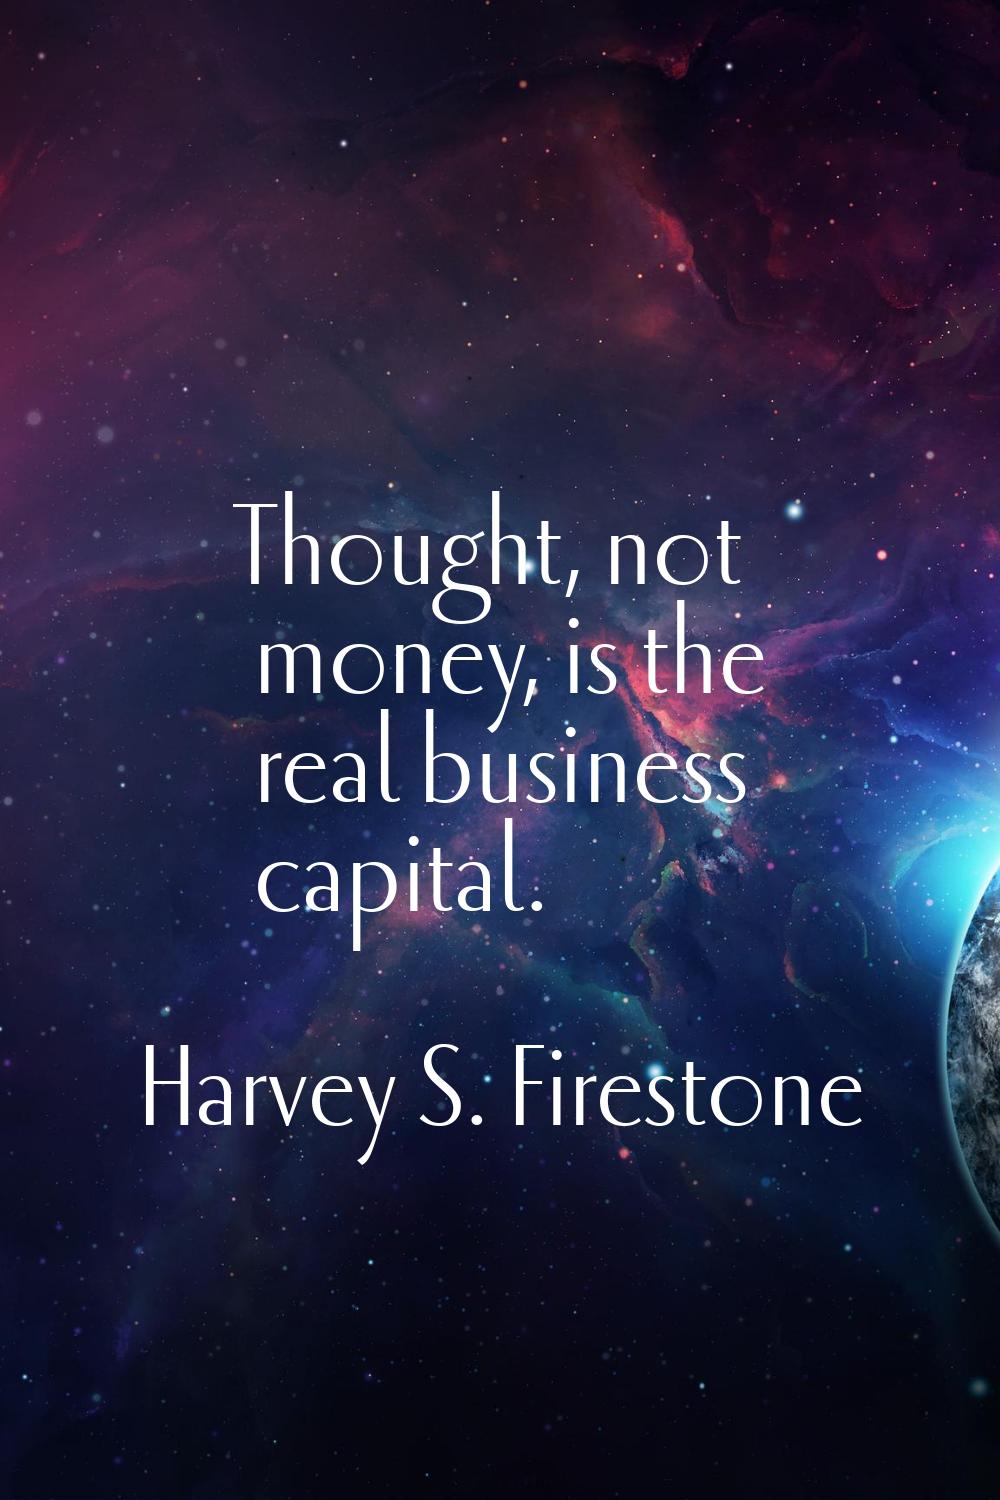 Thought, not money, is the real business capital.